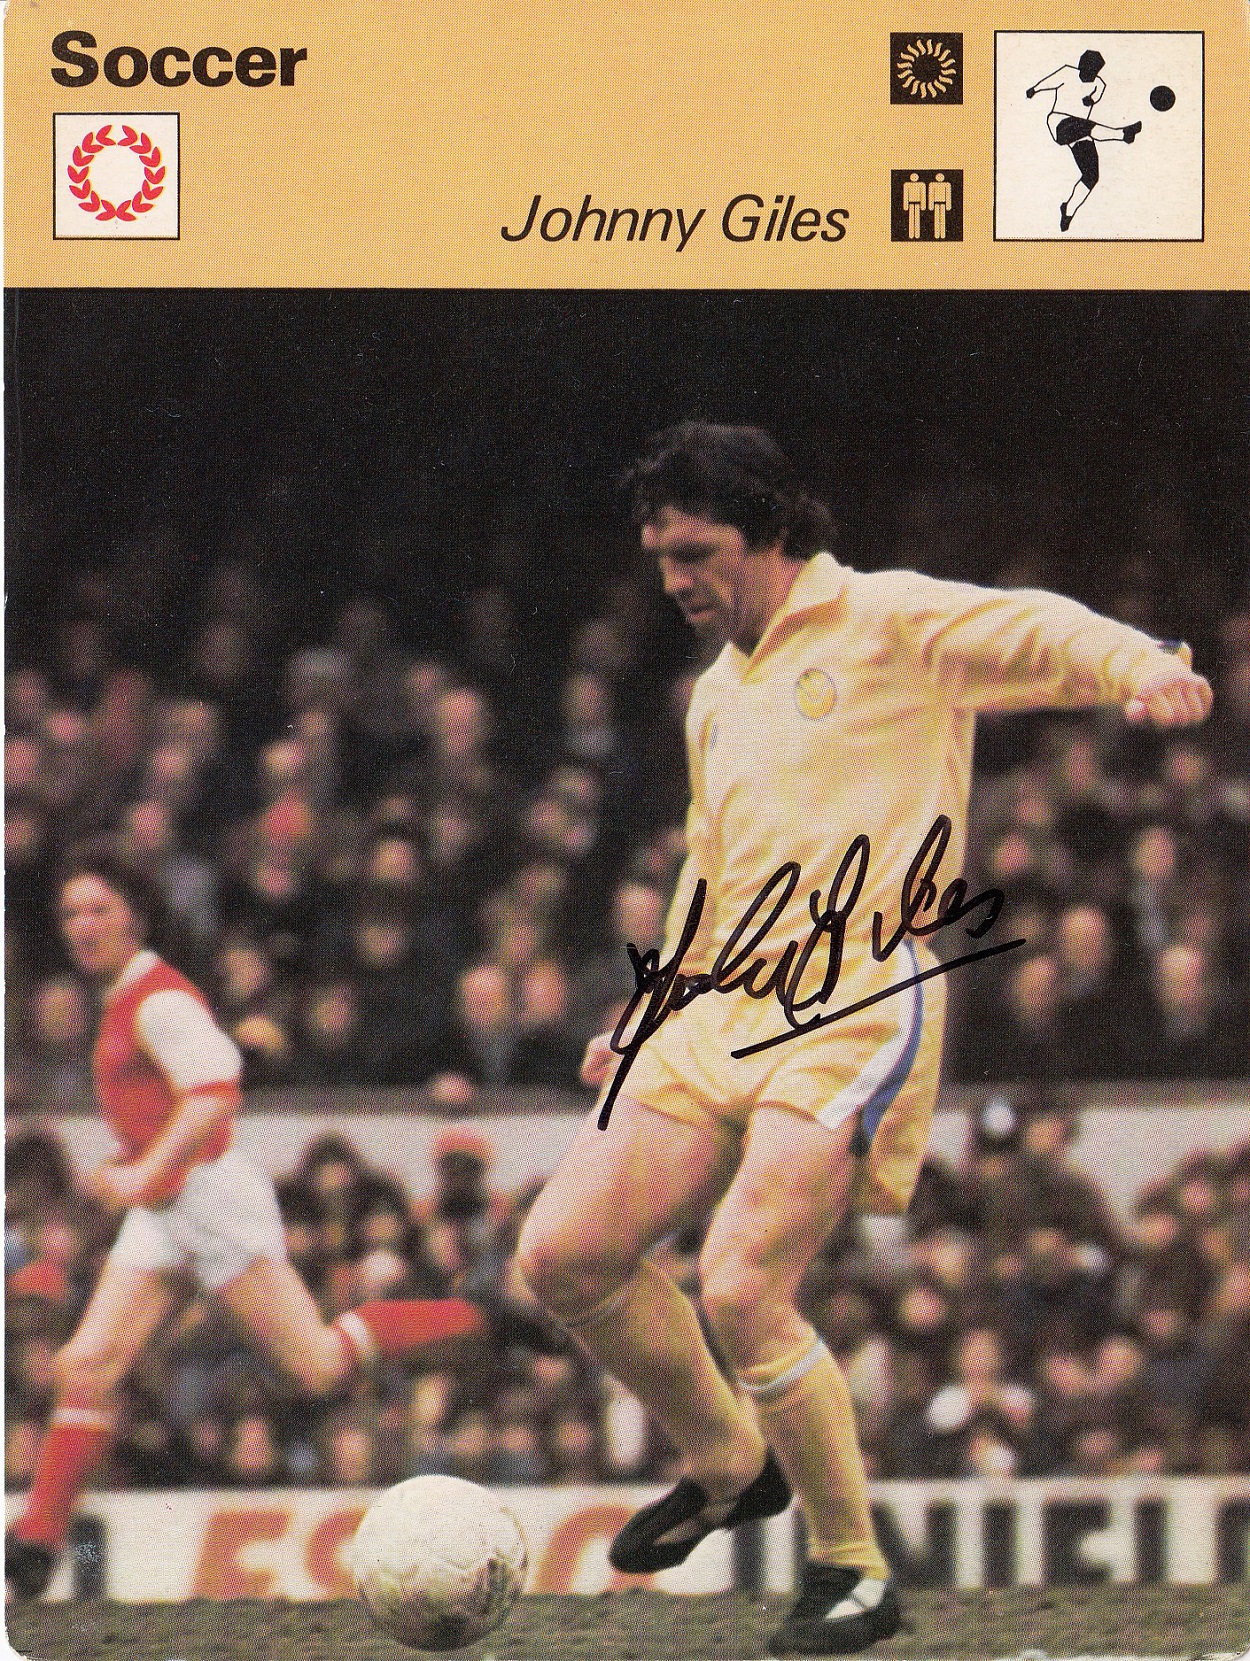 JOHN GILES 1977: Autographed Recontre Sportscaster card issued in 1977, superbly produced large size